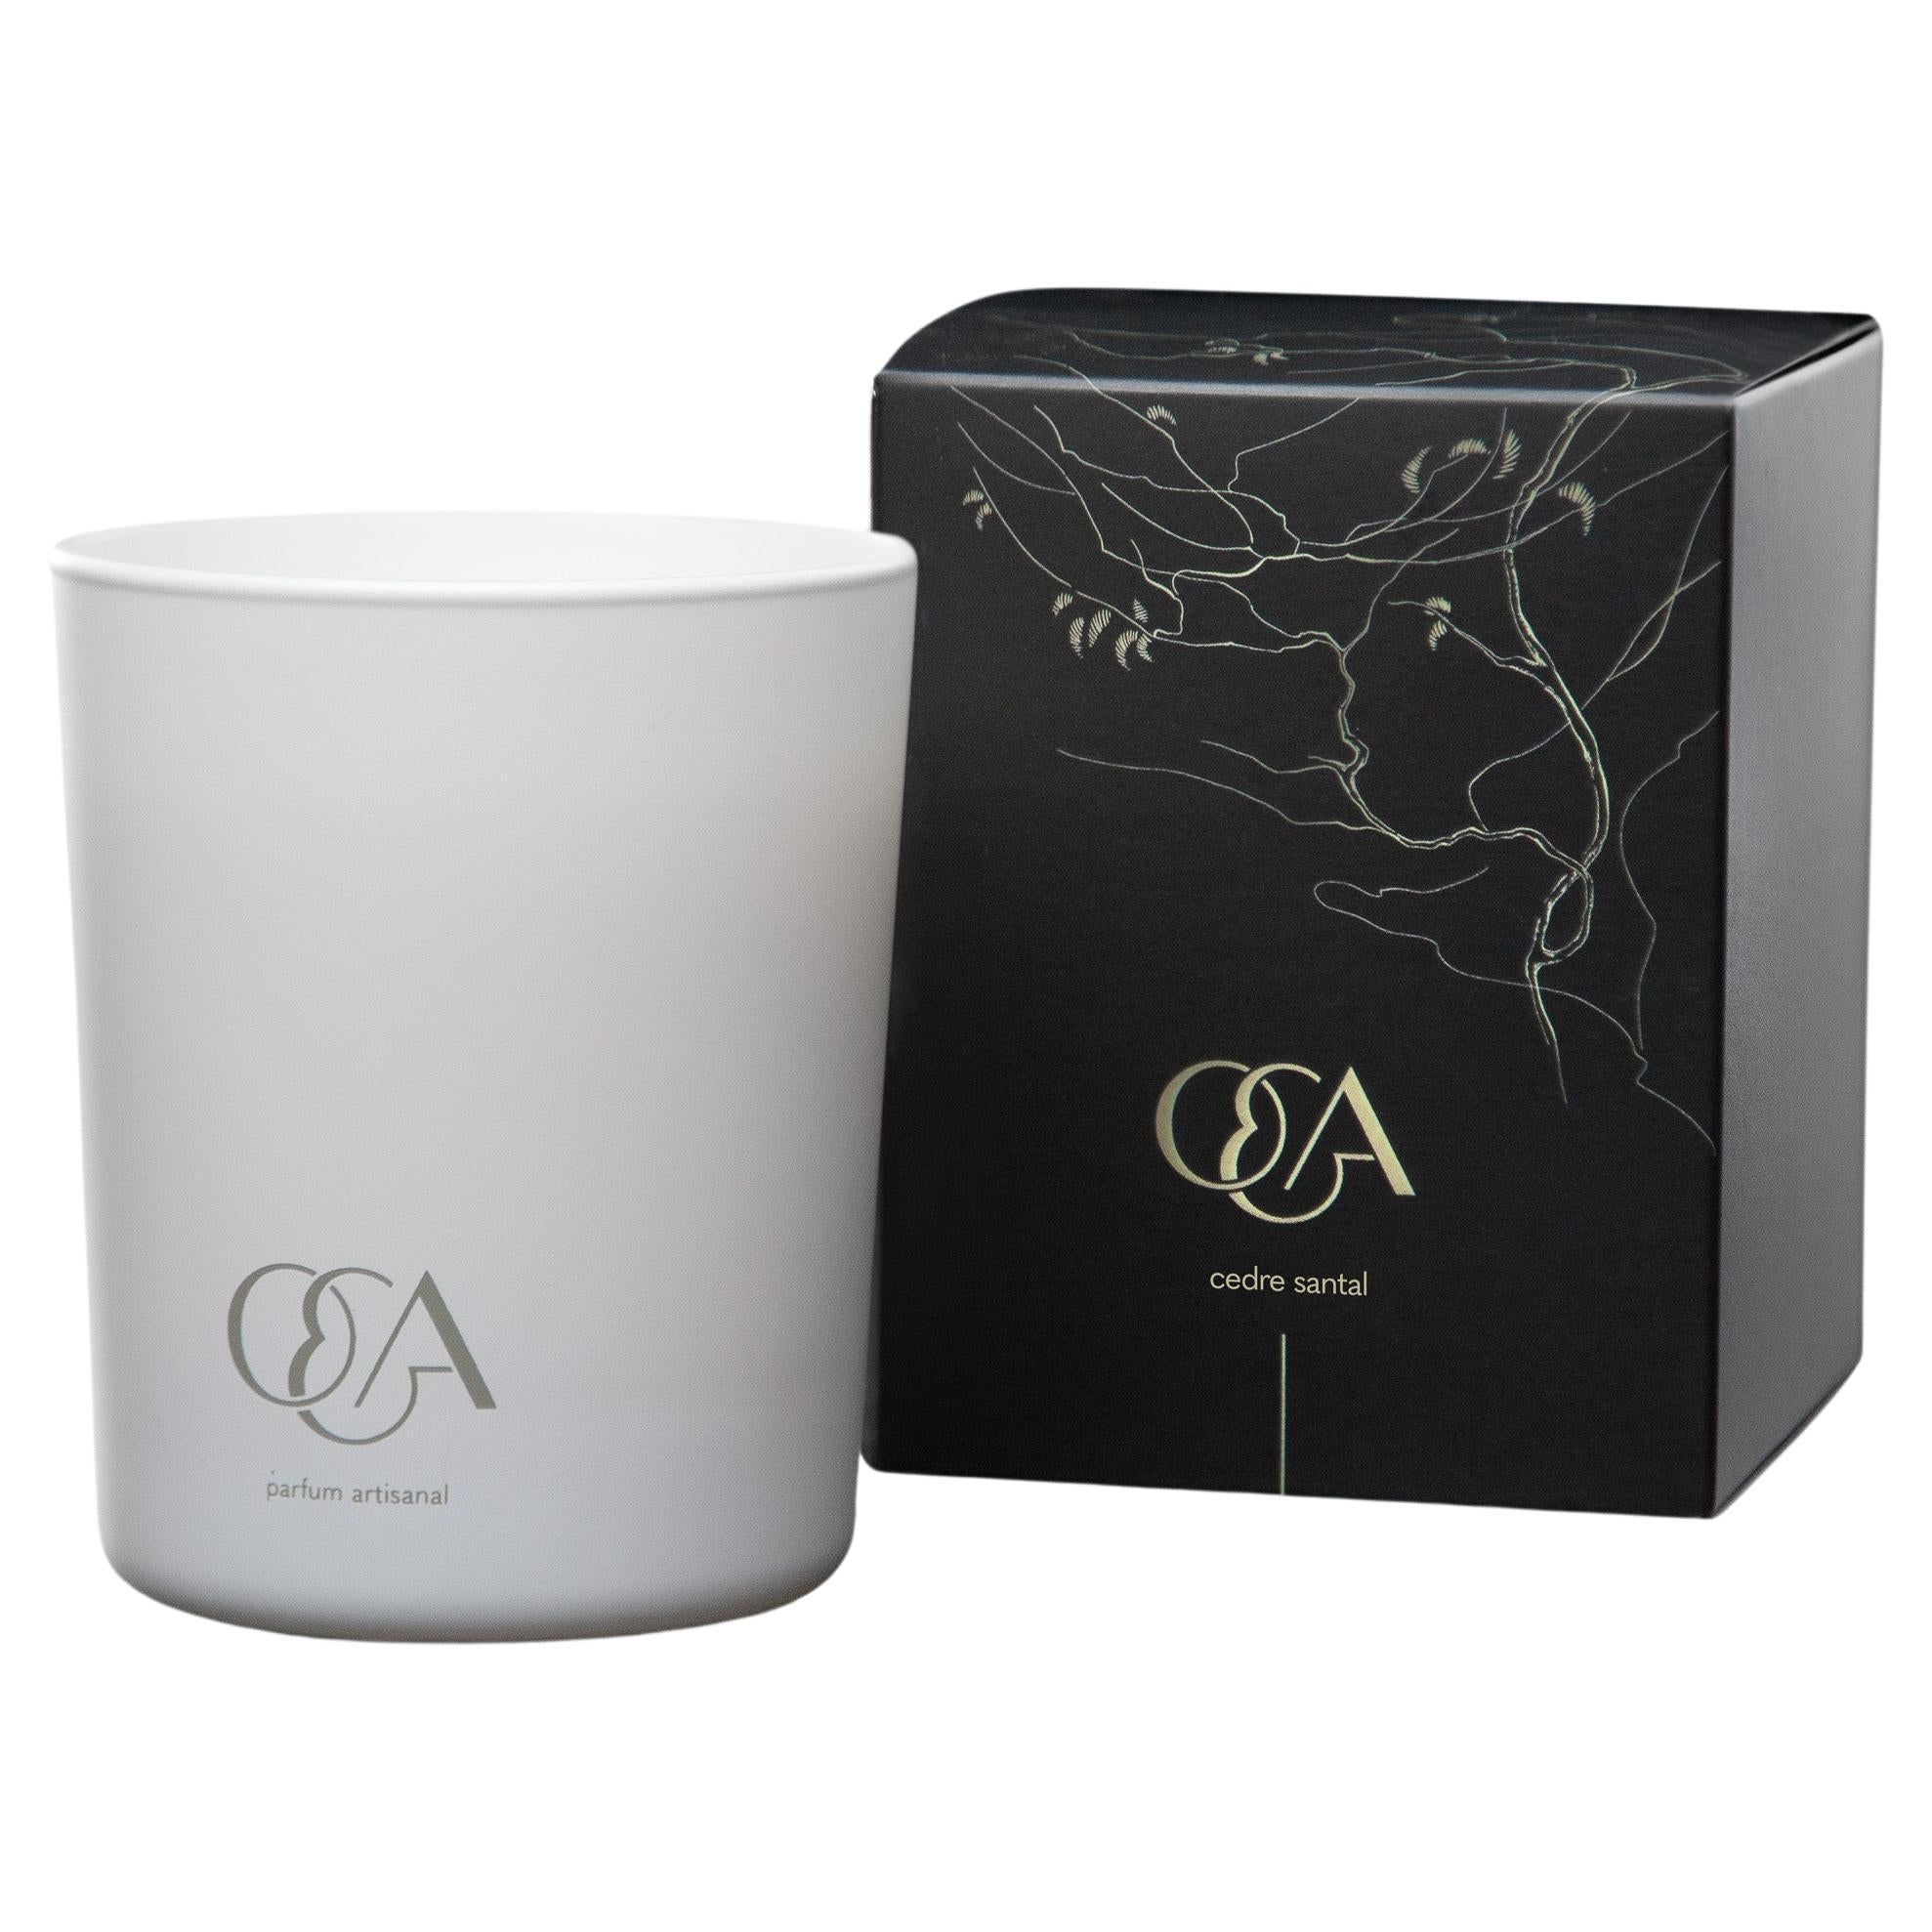 Cedre Santal Interior Candle with Amber Scent Premium Fragrance Oils from France